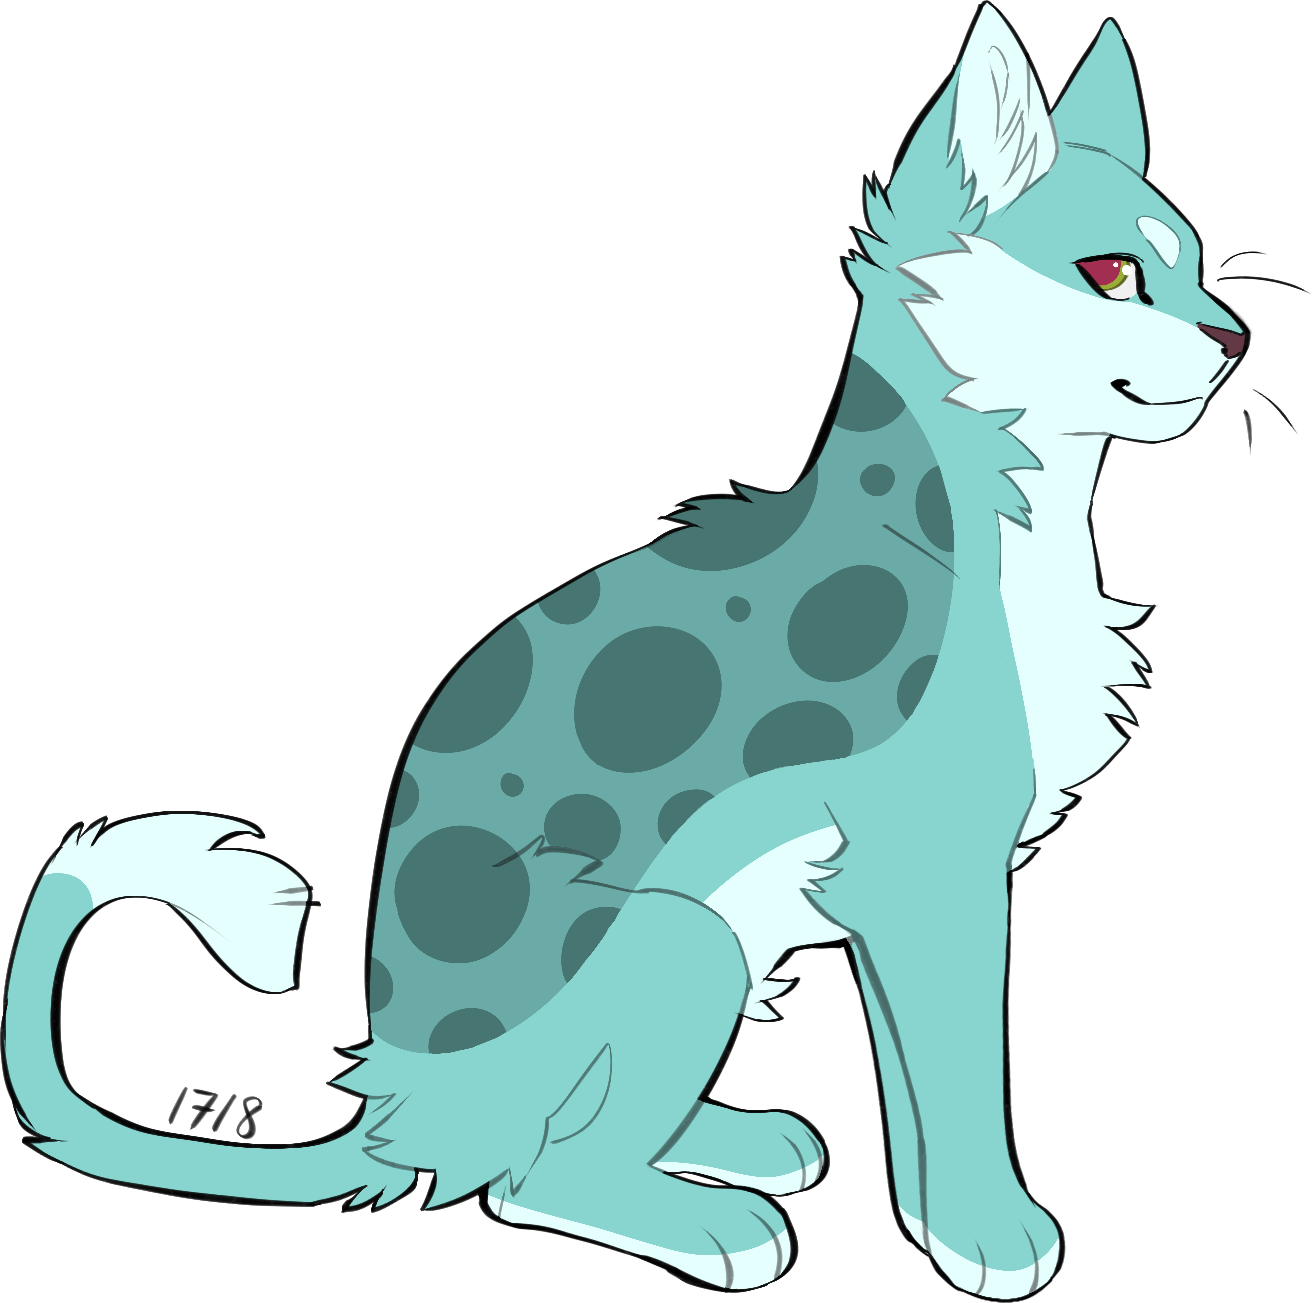 teal cat with large spots on its back